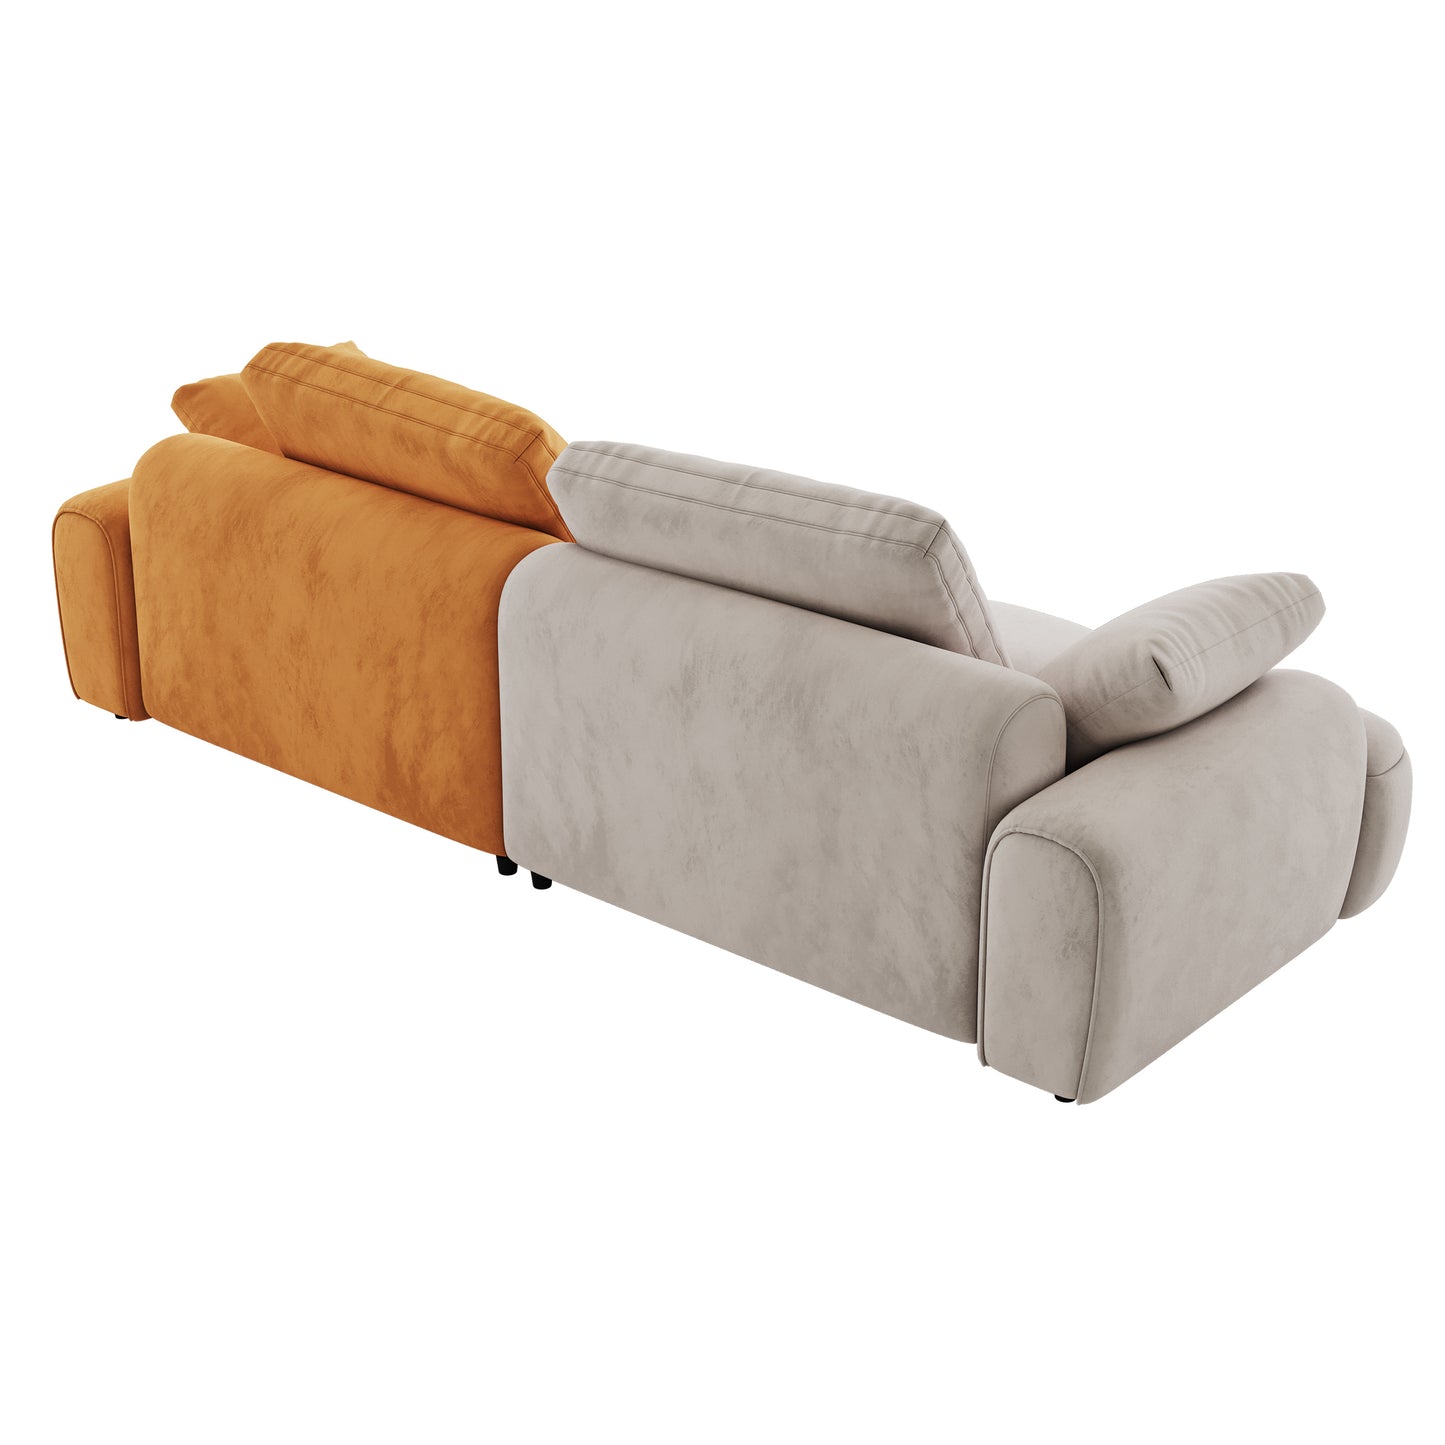 86.6″ Large size two Seat Sofa,Modern Upholstered,Beige paired with yellow suede fabric